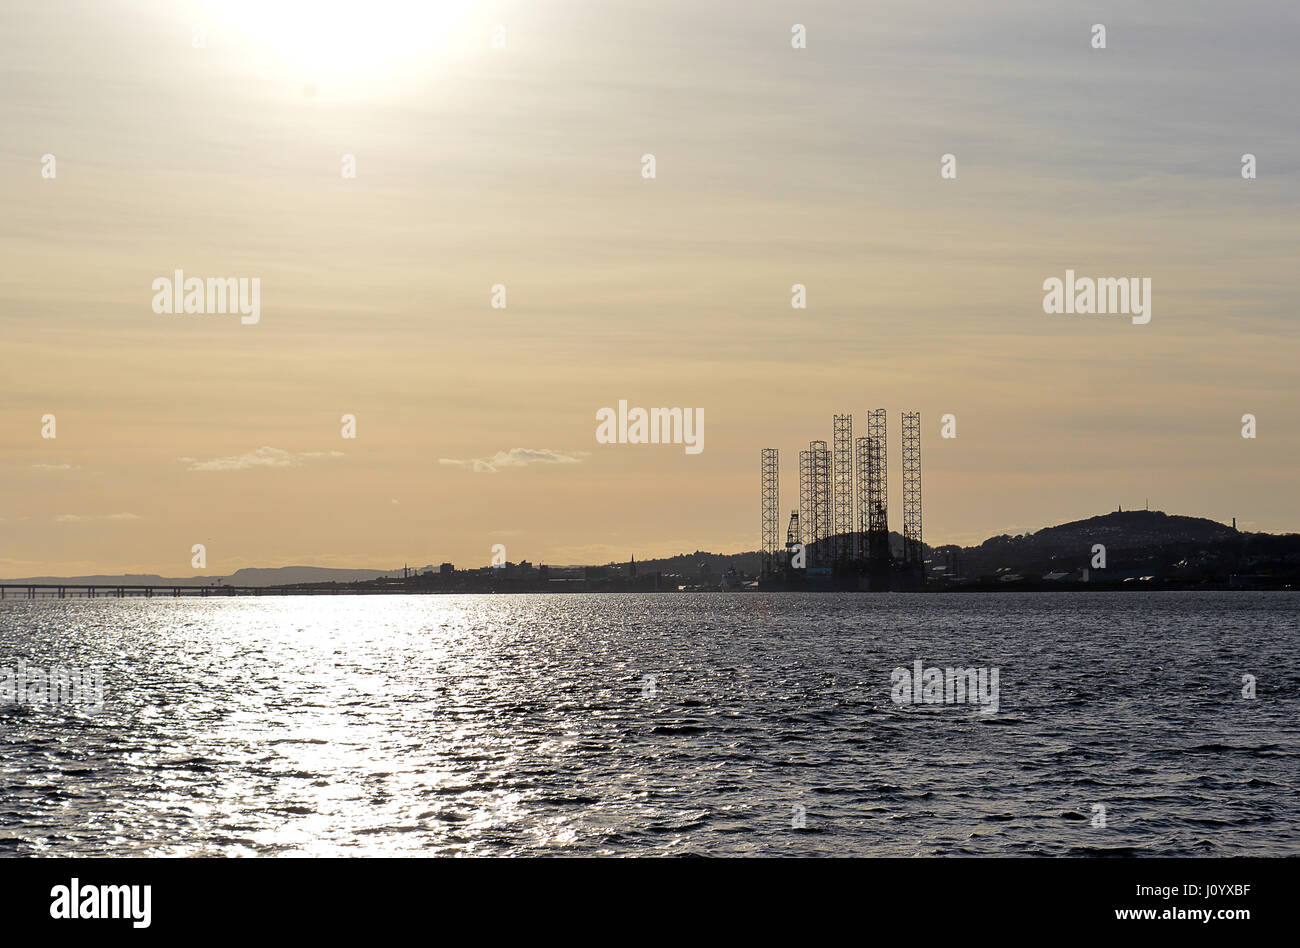 DUNDEE, SCOTLAND - 2 APRIL 2017: Late evening sun falls on the Firth of Tay with the port of Dundee and oil platforms in the background Stock Photo